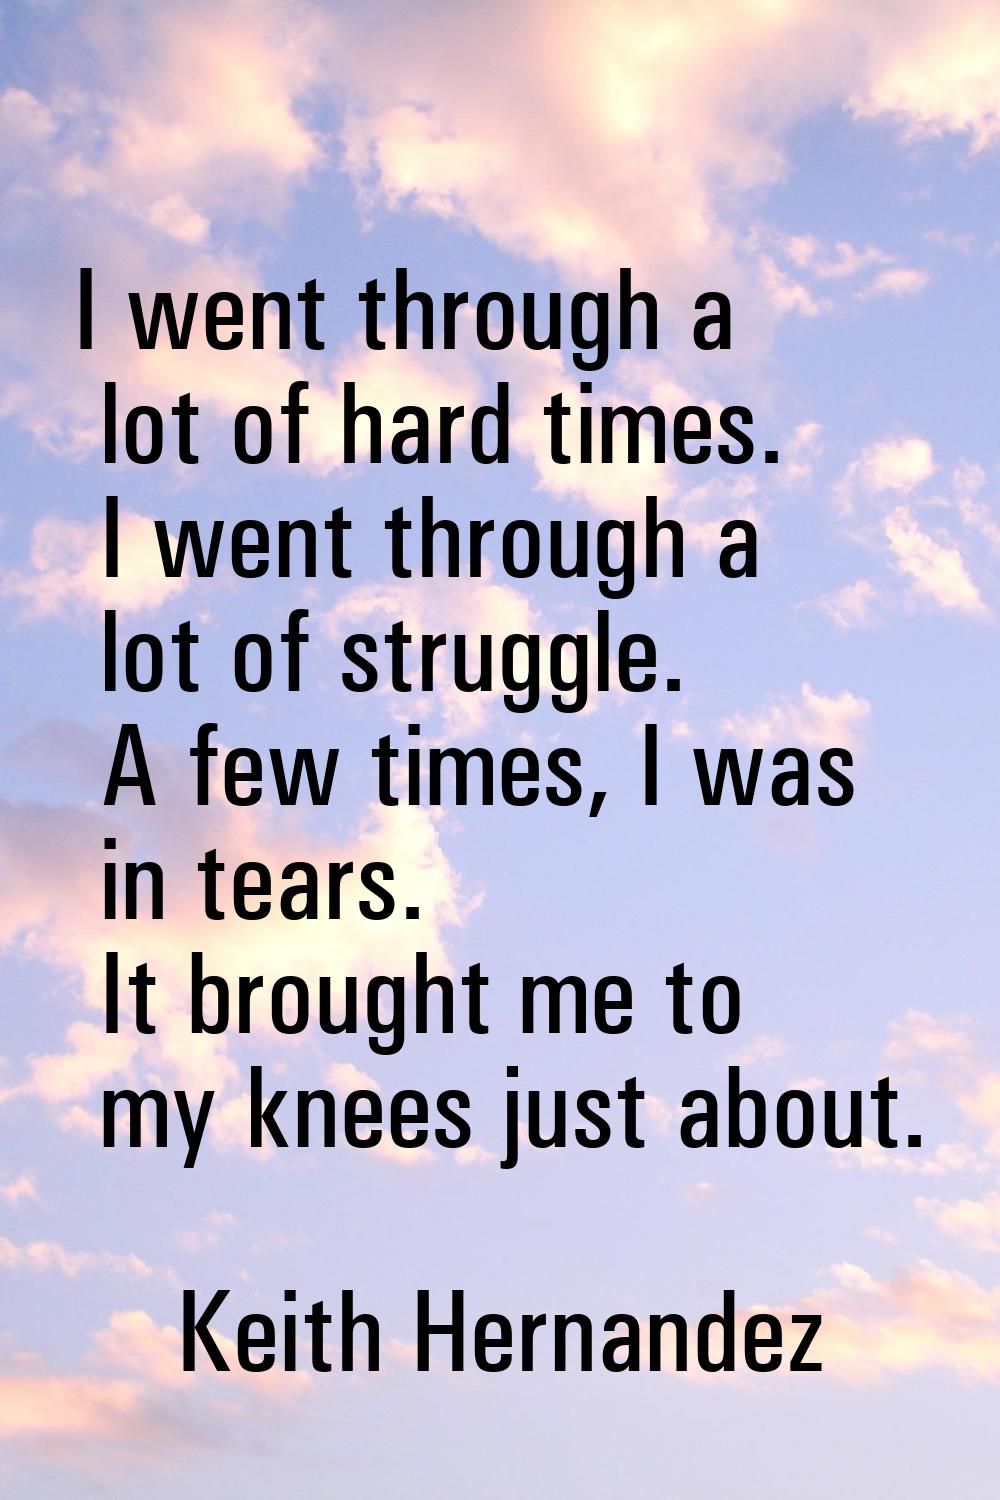 I went through a lot of hard times. I went through a lot of struggle. A few times, I was in tears. 